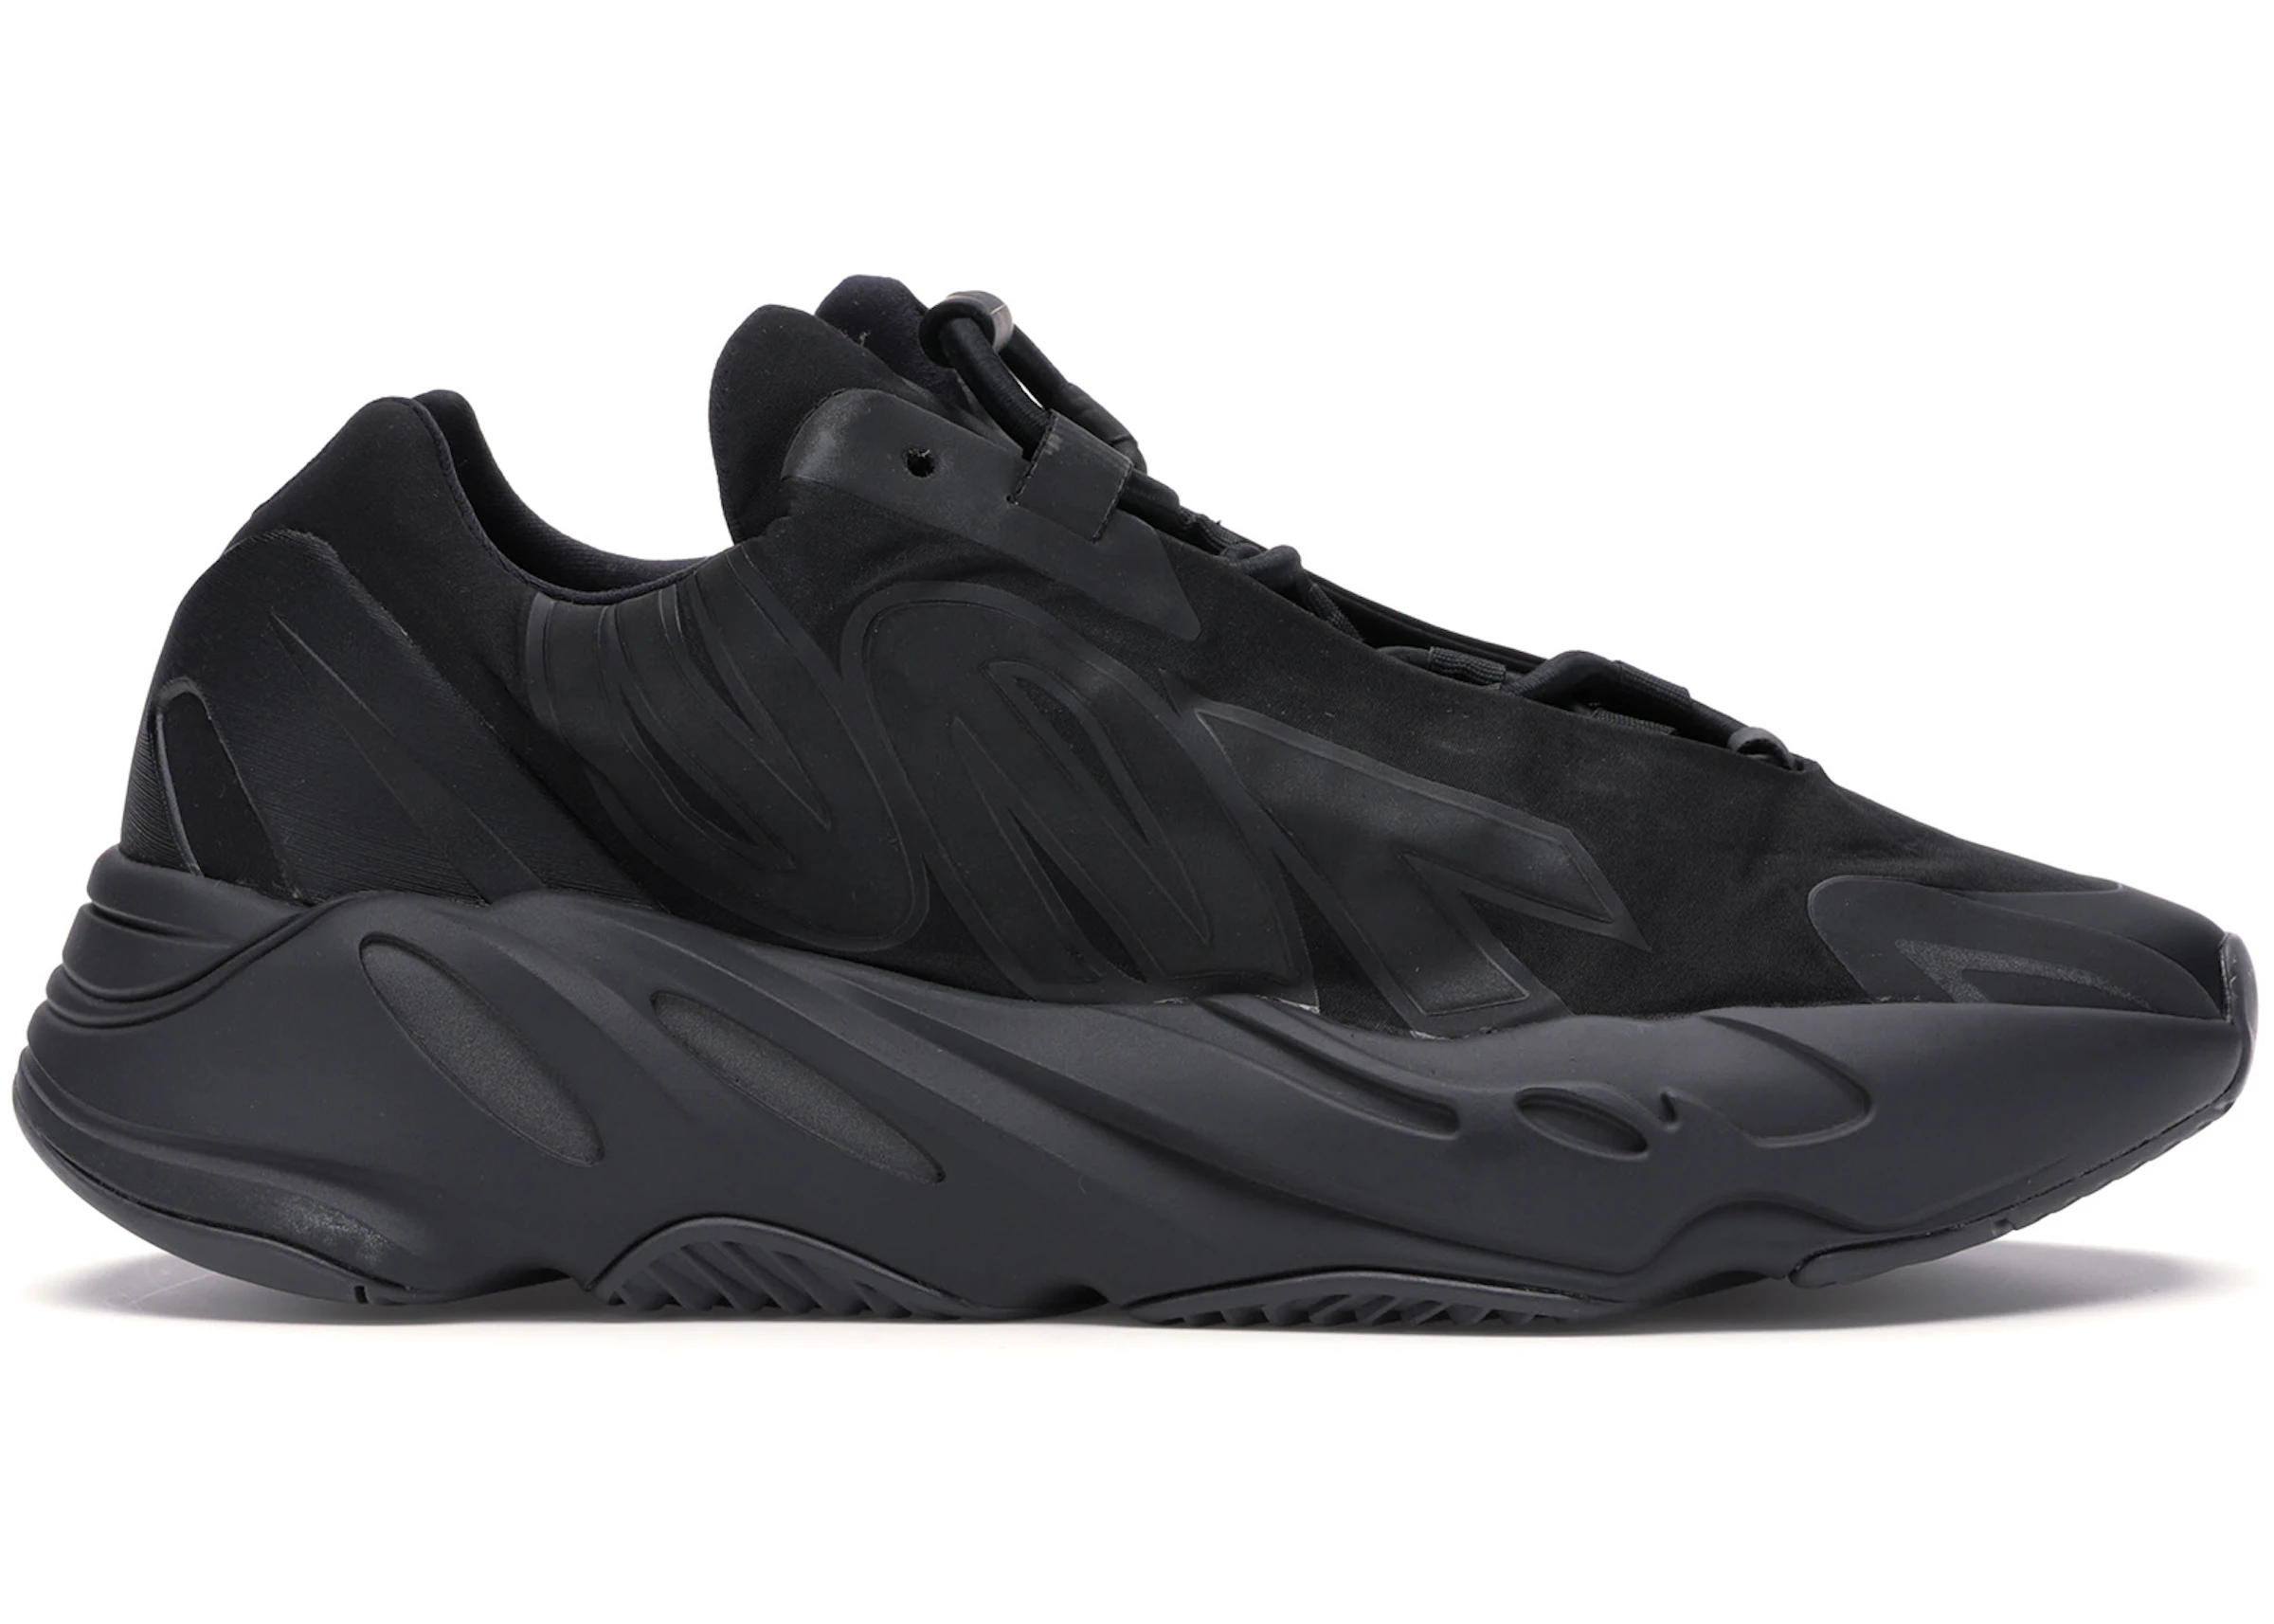 how often apologize mortgage adidas Yeezy Boost 700 MNVN Triple Black - FV4440 - US